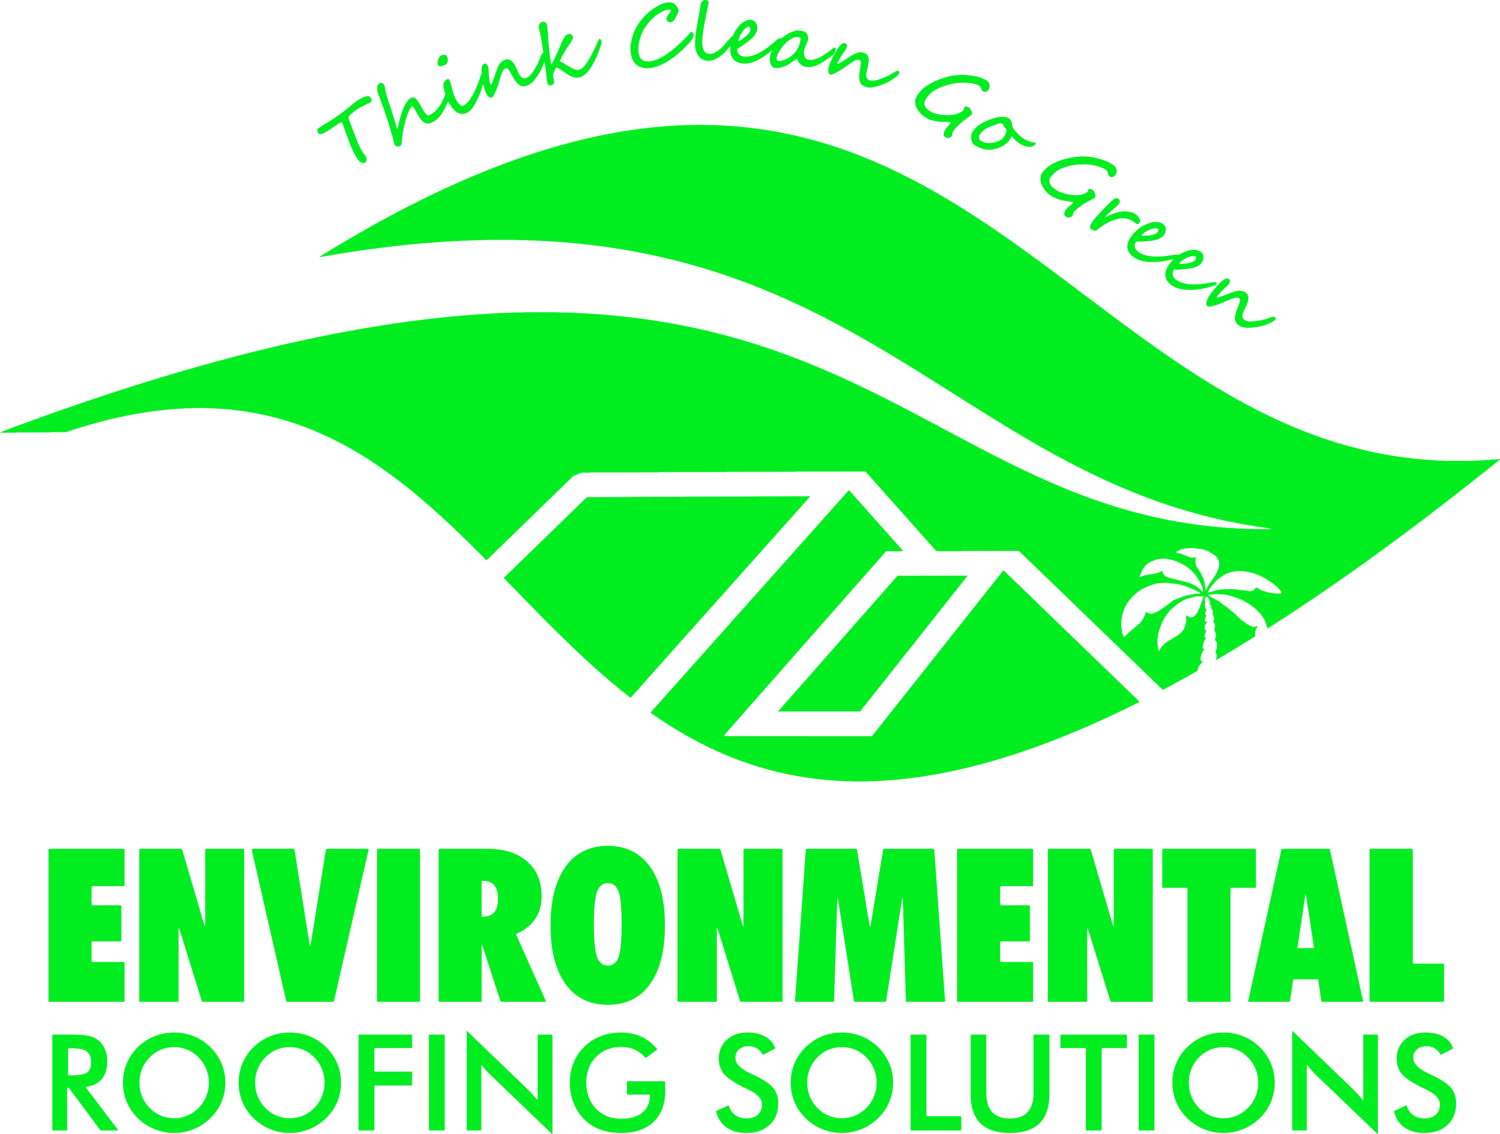 Environmental Roofing Solutions roofing company in Hawaii